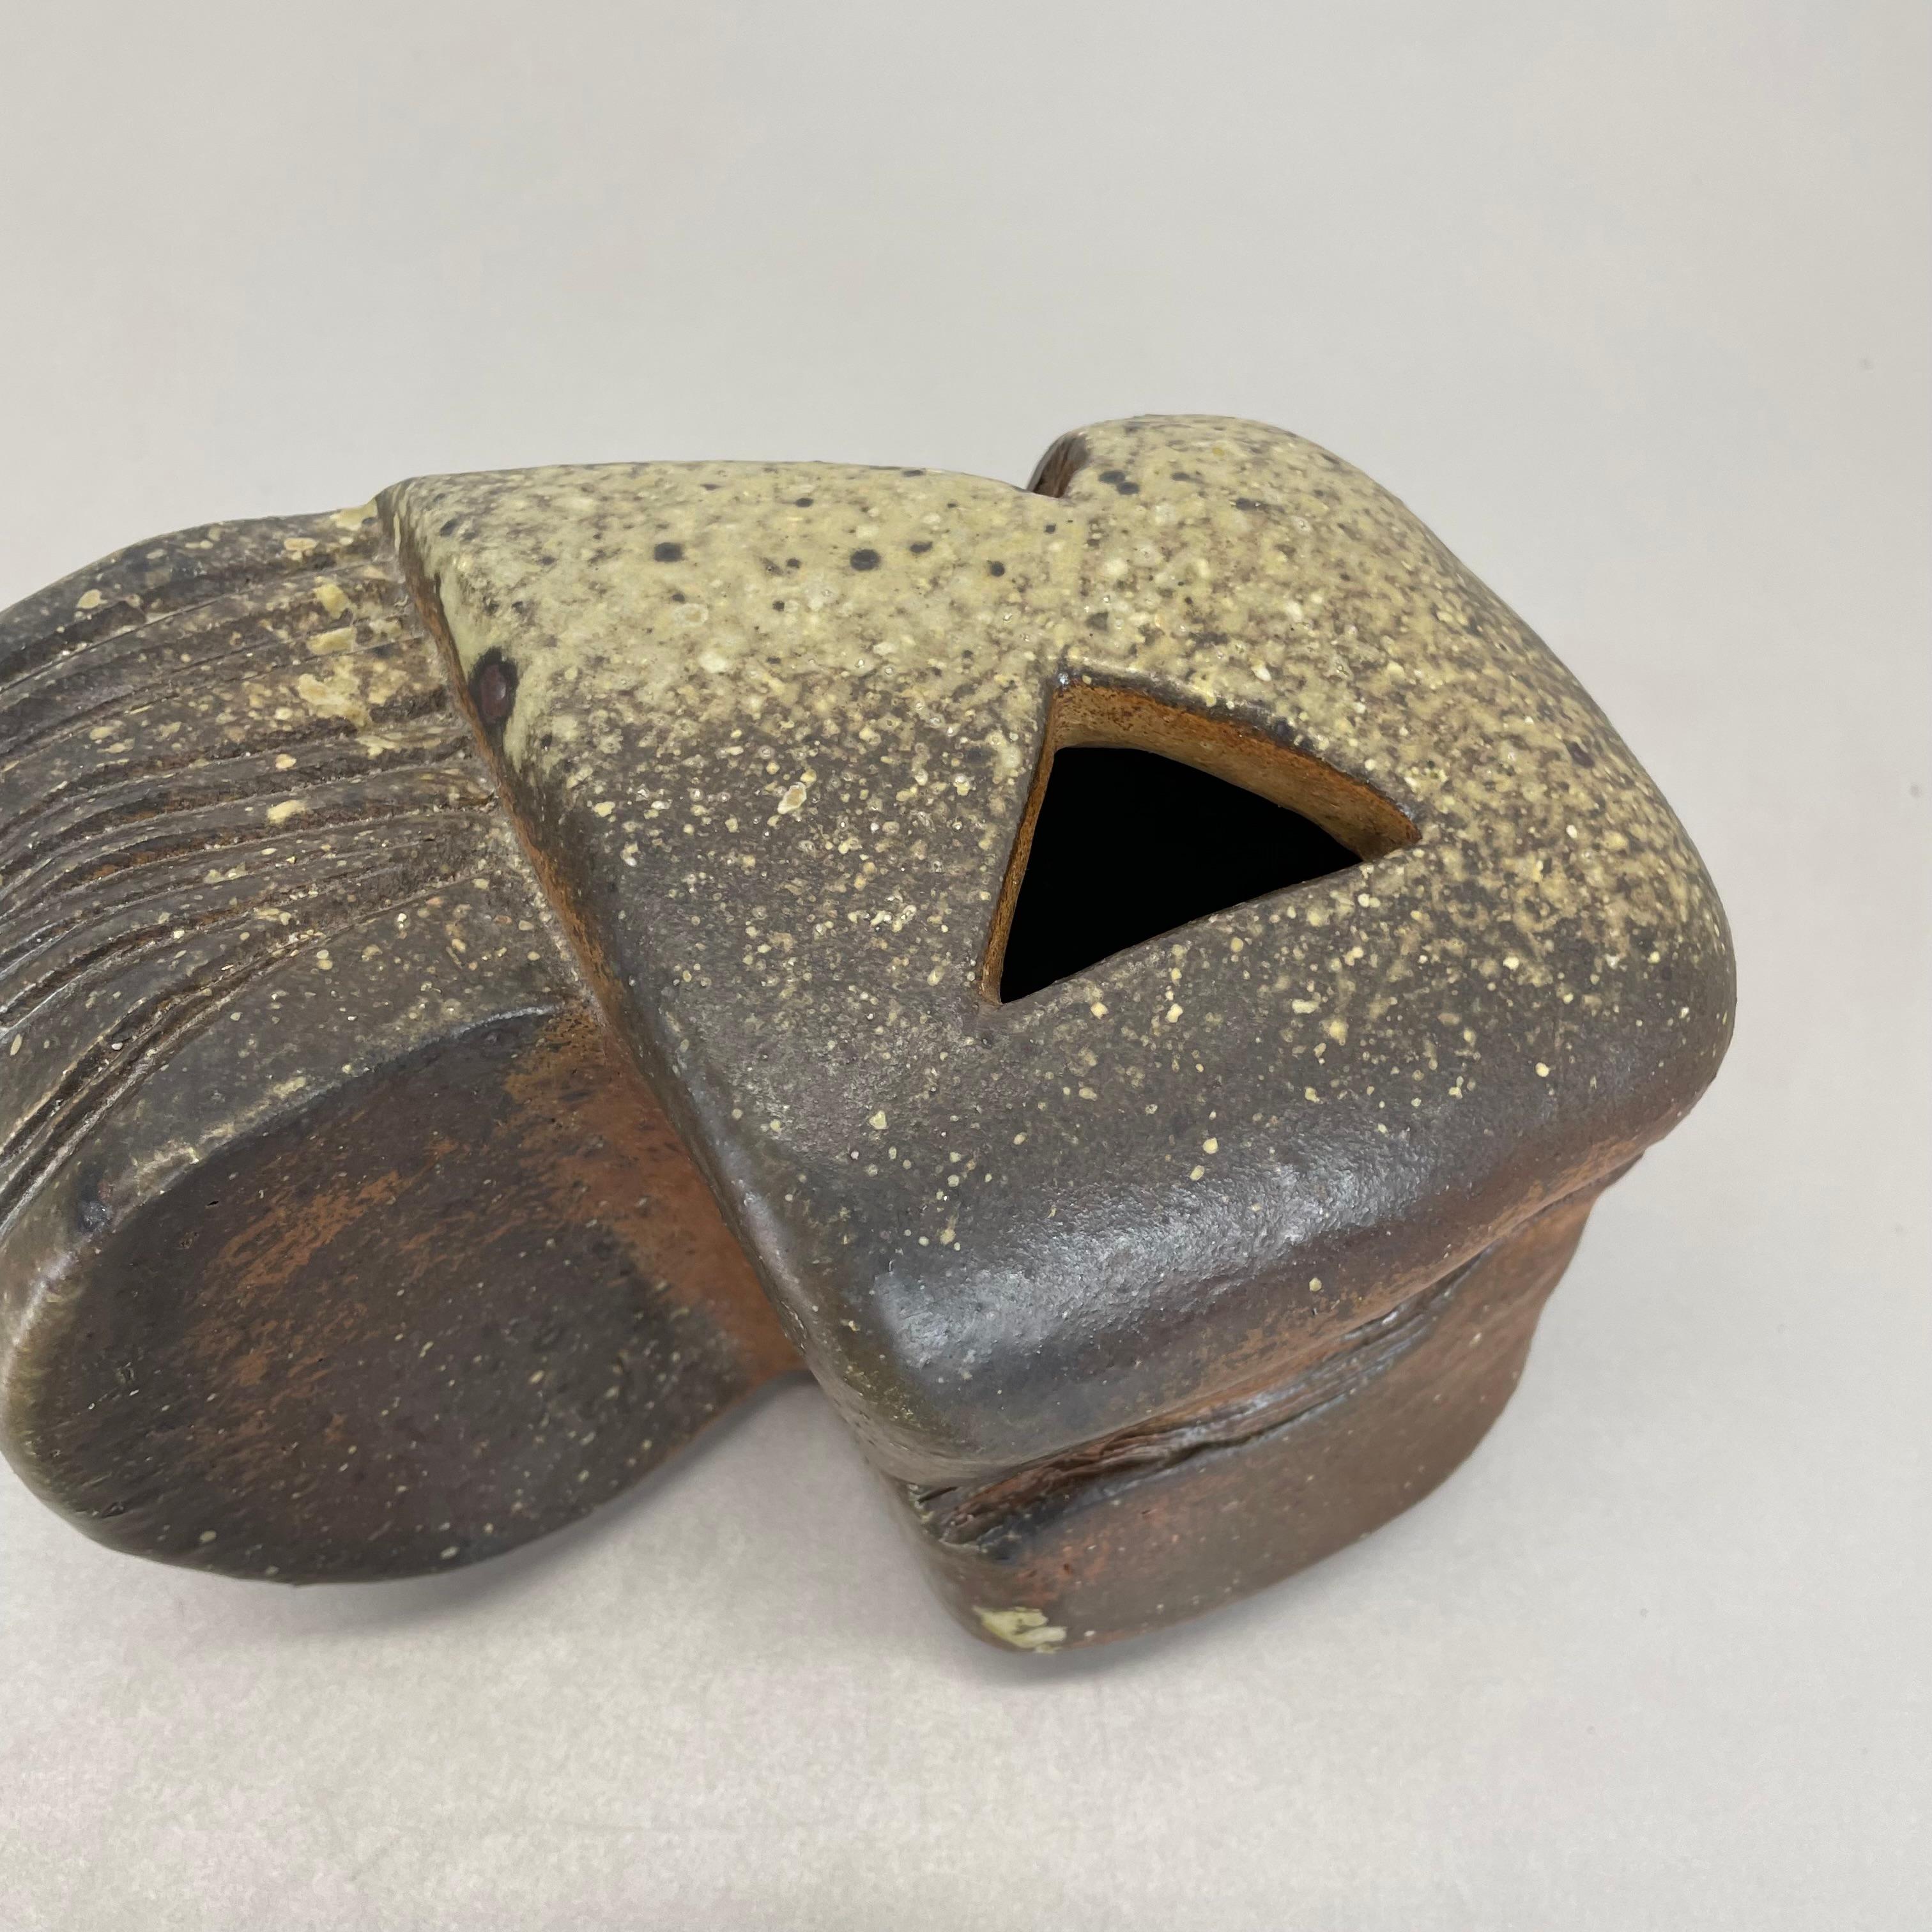 Abstract Ceramic Studio Pottery Object by.Horst Kerstan, Kandern Germany 1980s For Sale 6